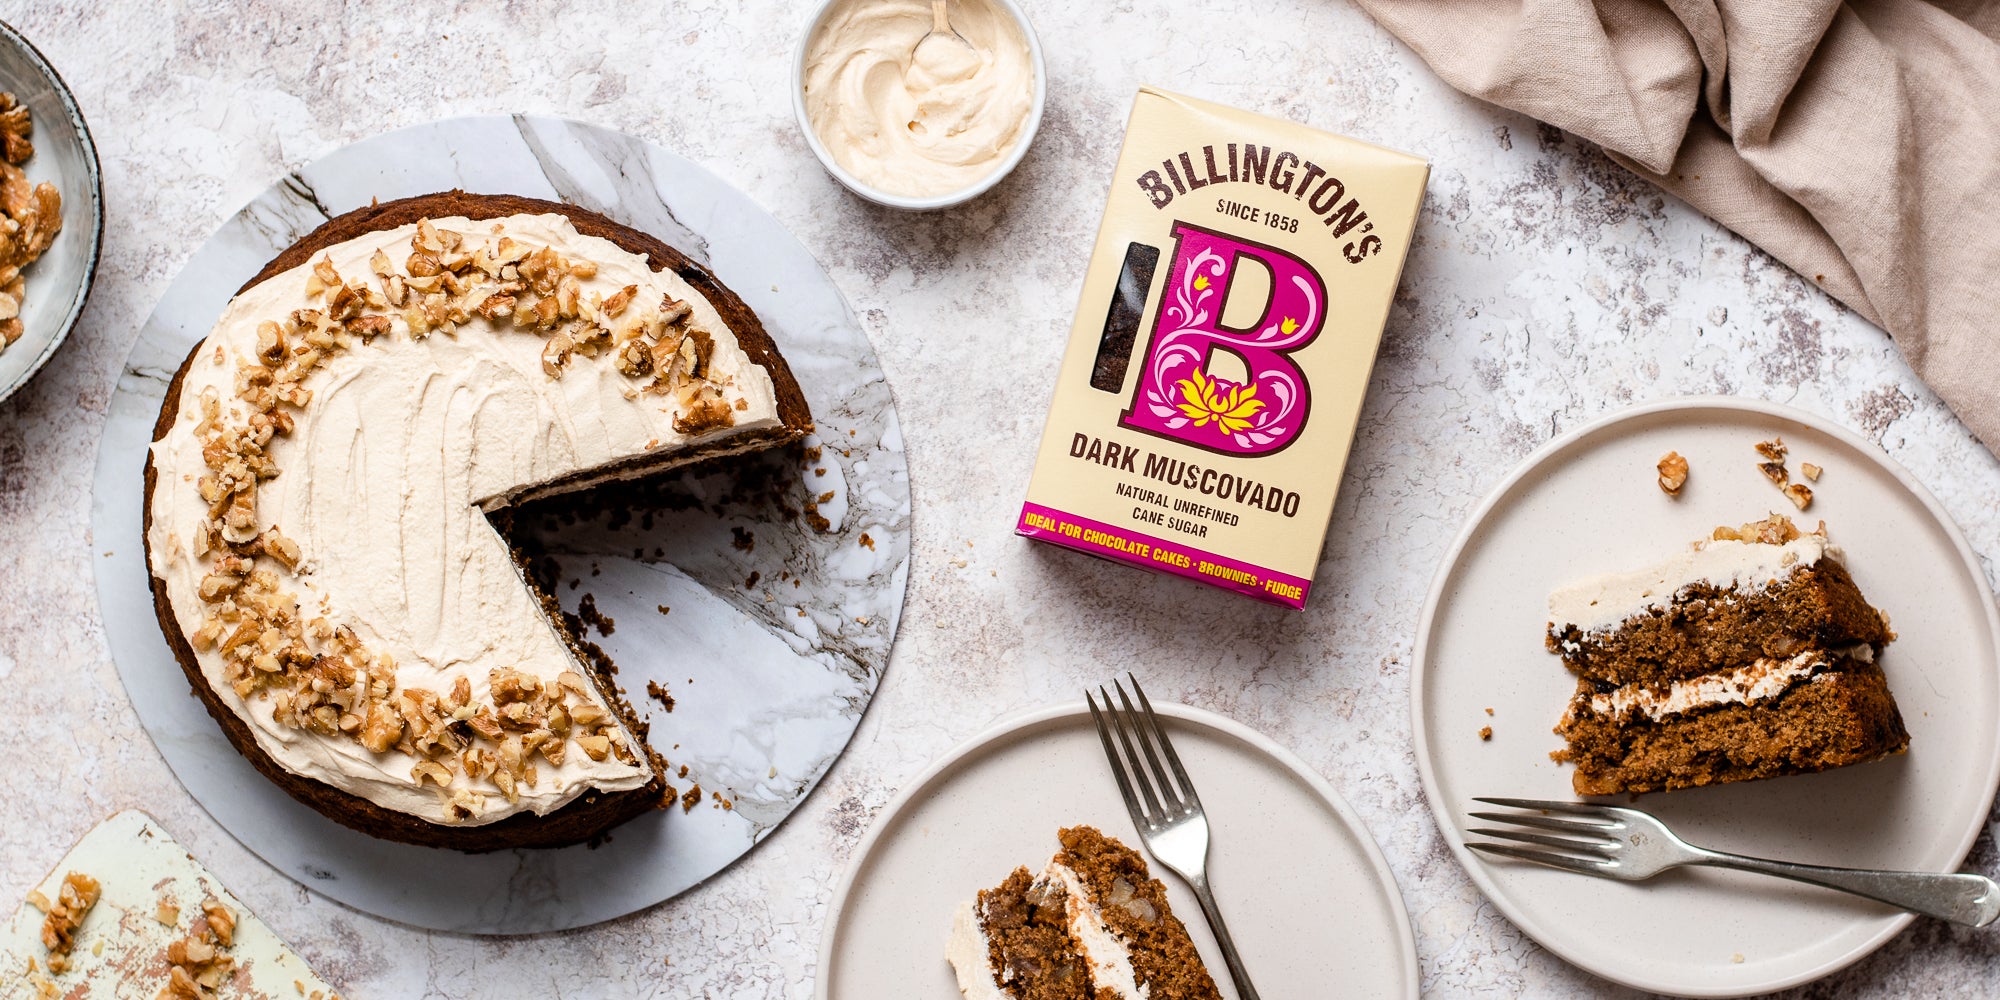 Gluten Free Vegan Coffee Cake with a slice cut out of it next to a box of Billington's Dark Muscovado sugar